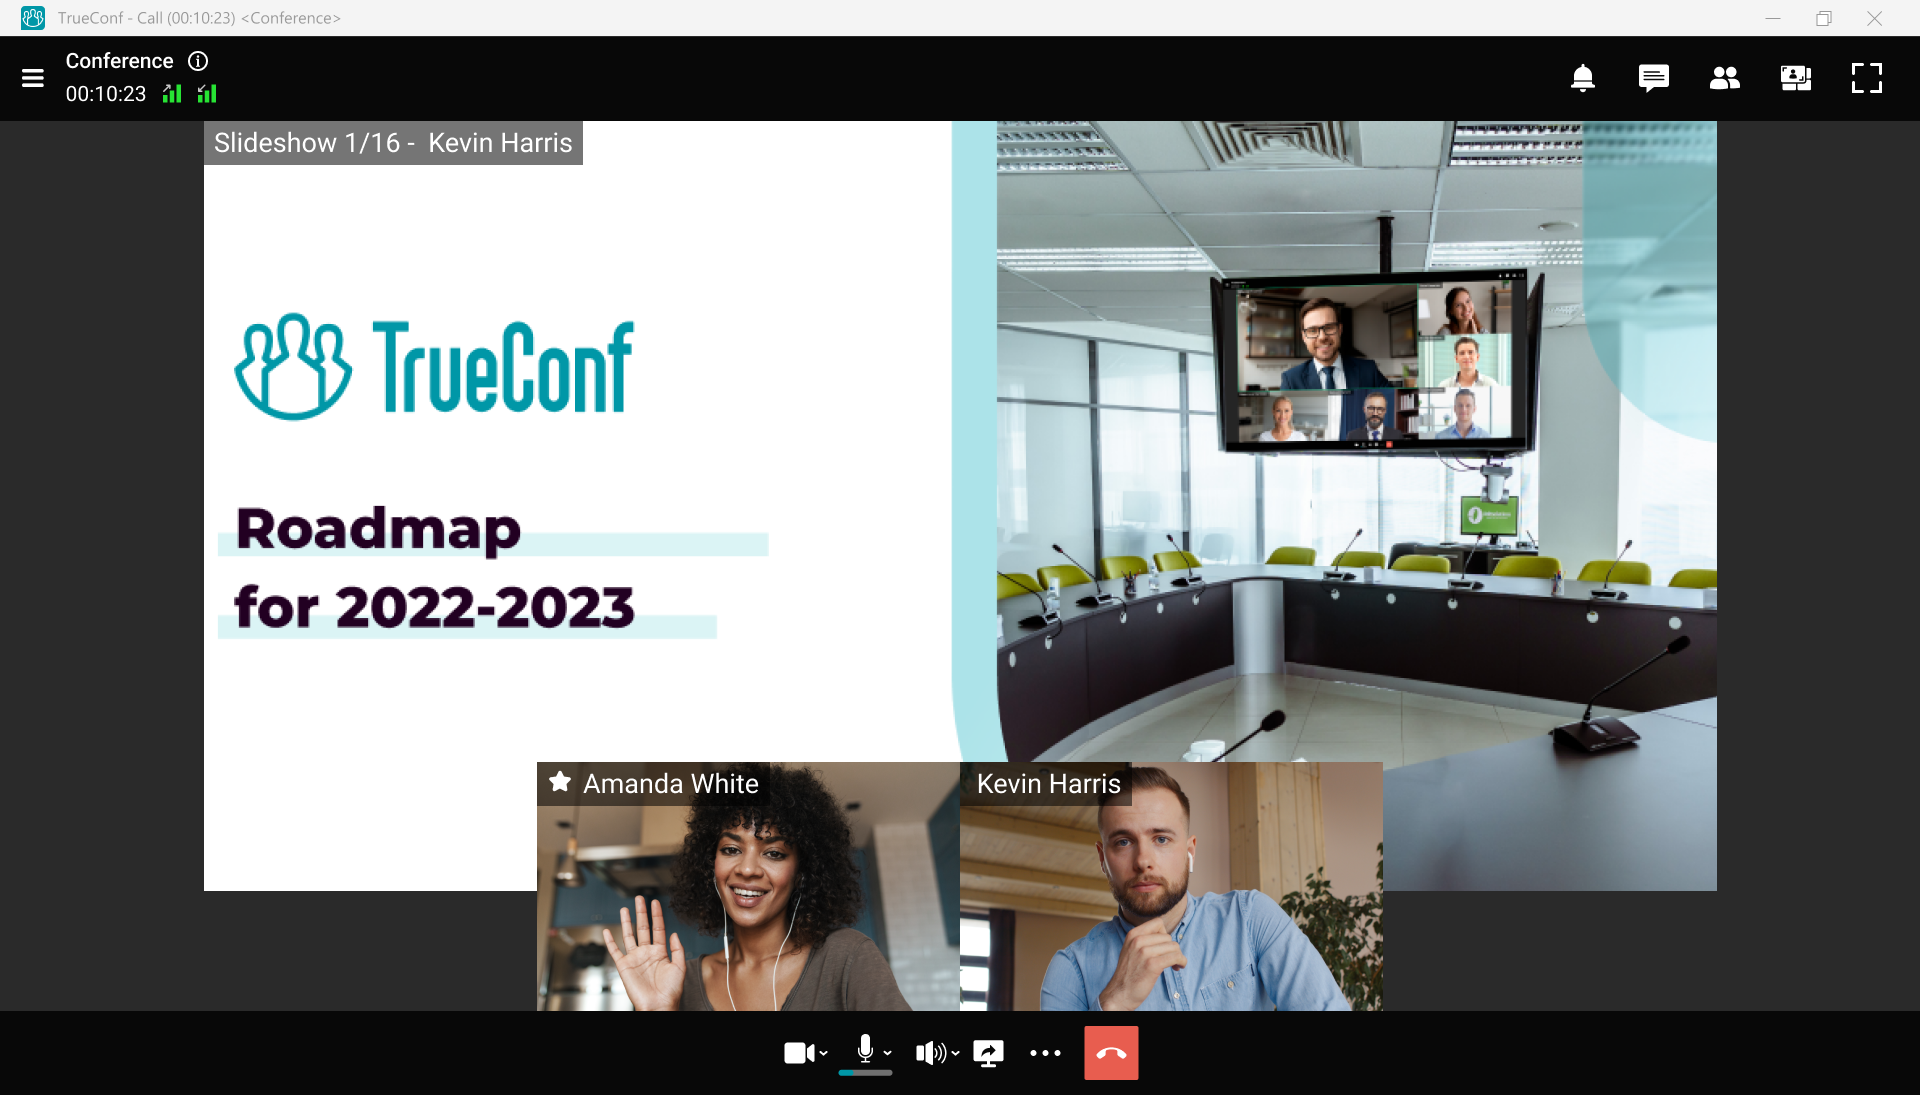 TrueConf 8.1 for Windows: Enhanced team messaging, media player for recordings, and automatic content spotlight 6